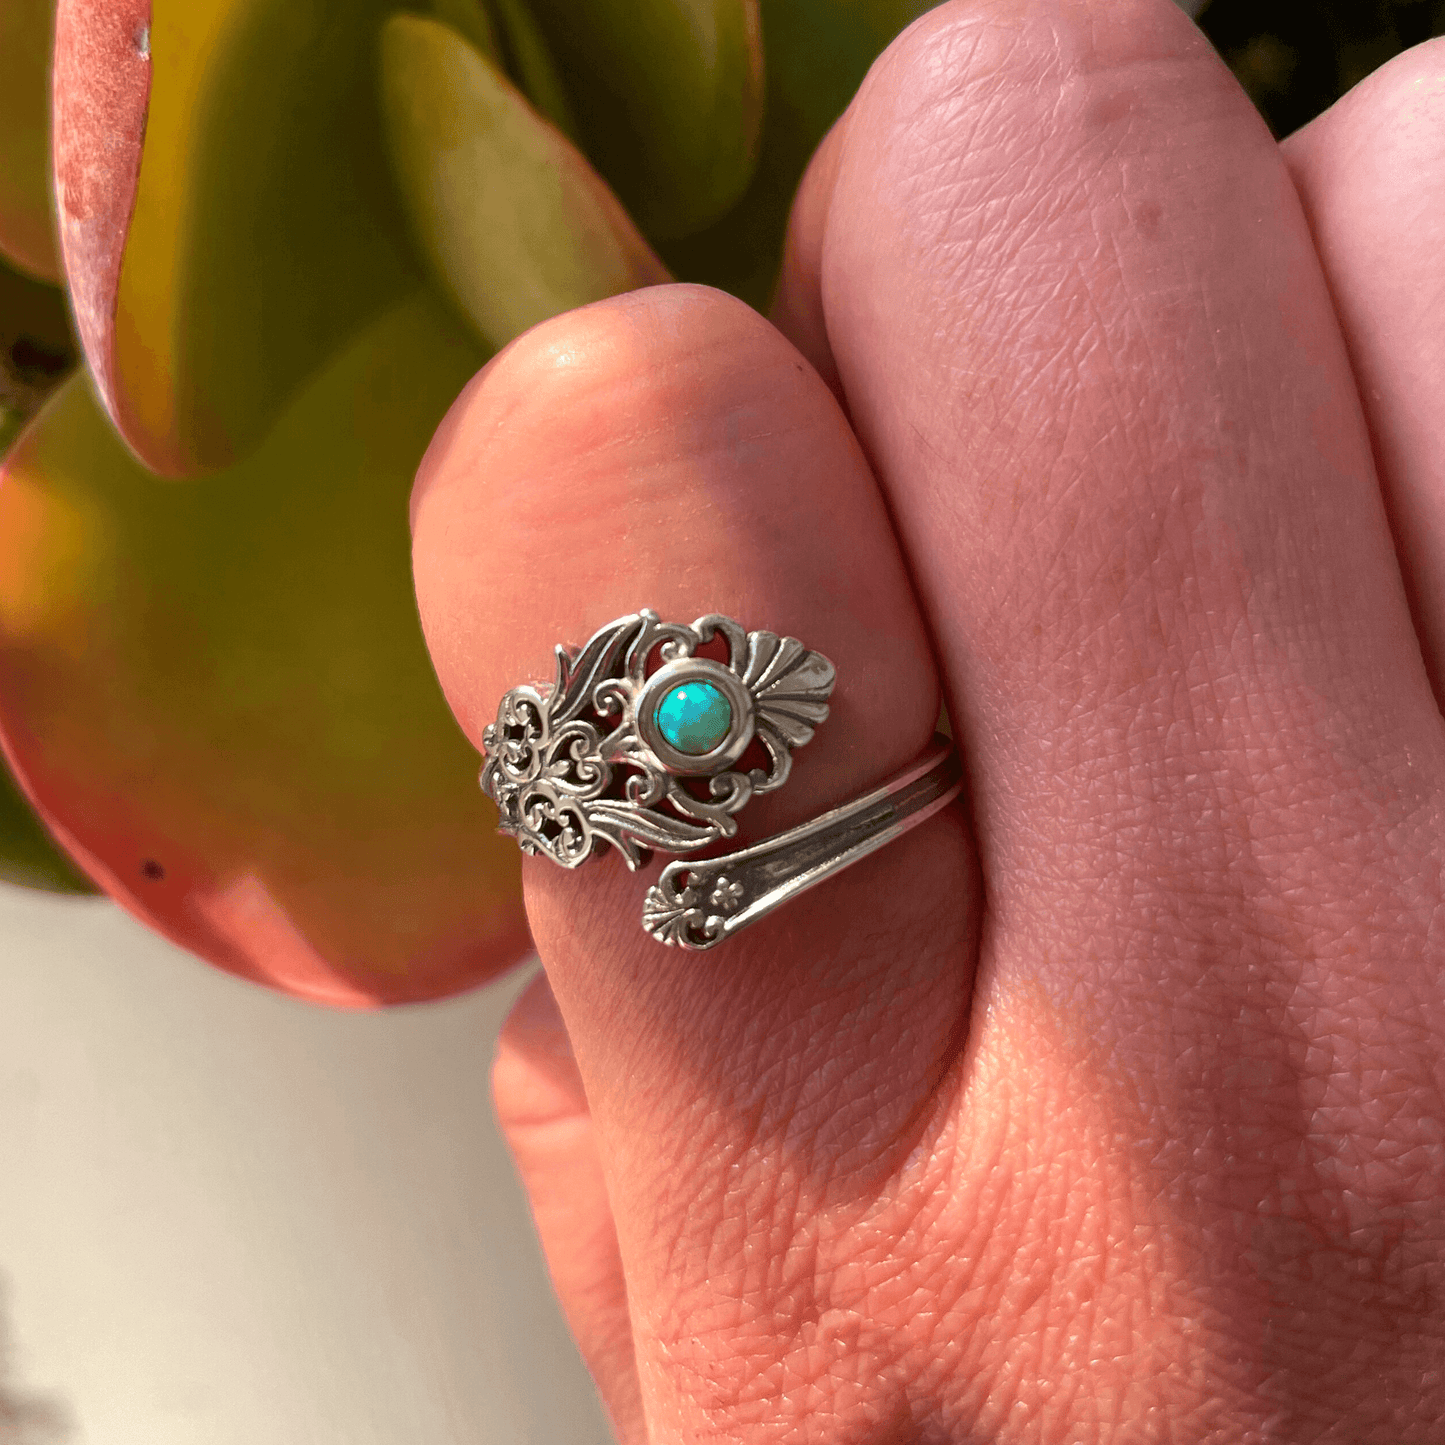 Adjustable Spoon Ring in Silver with Green Opal